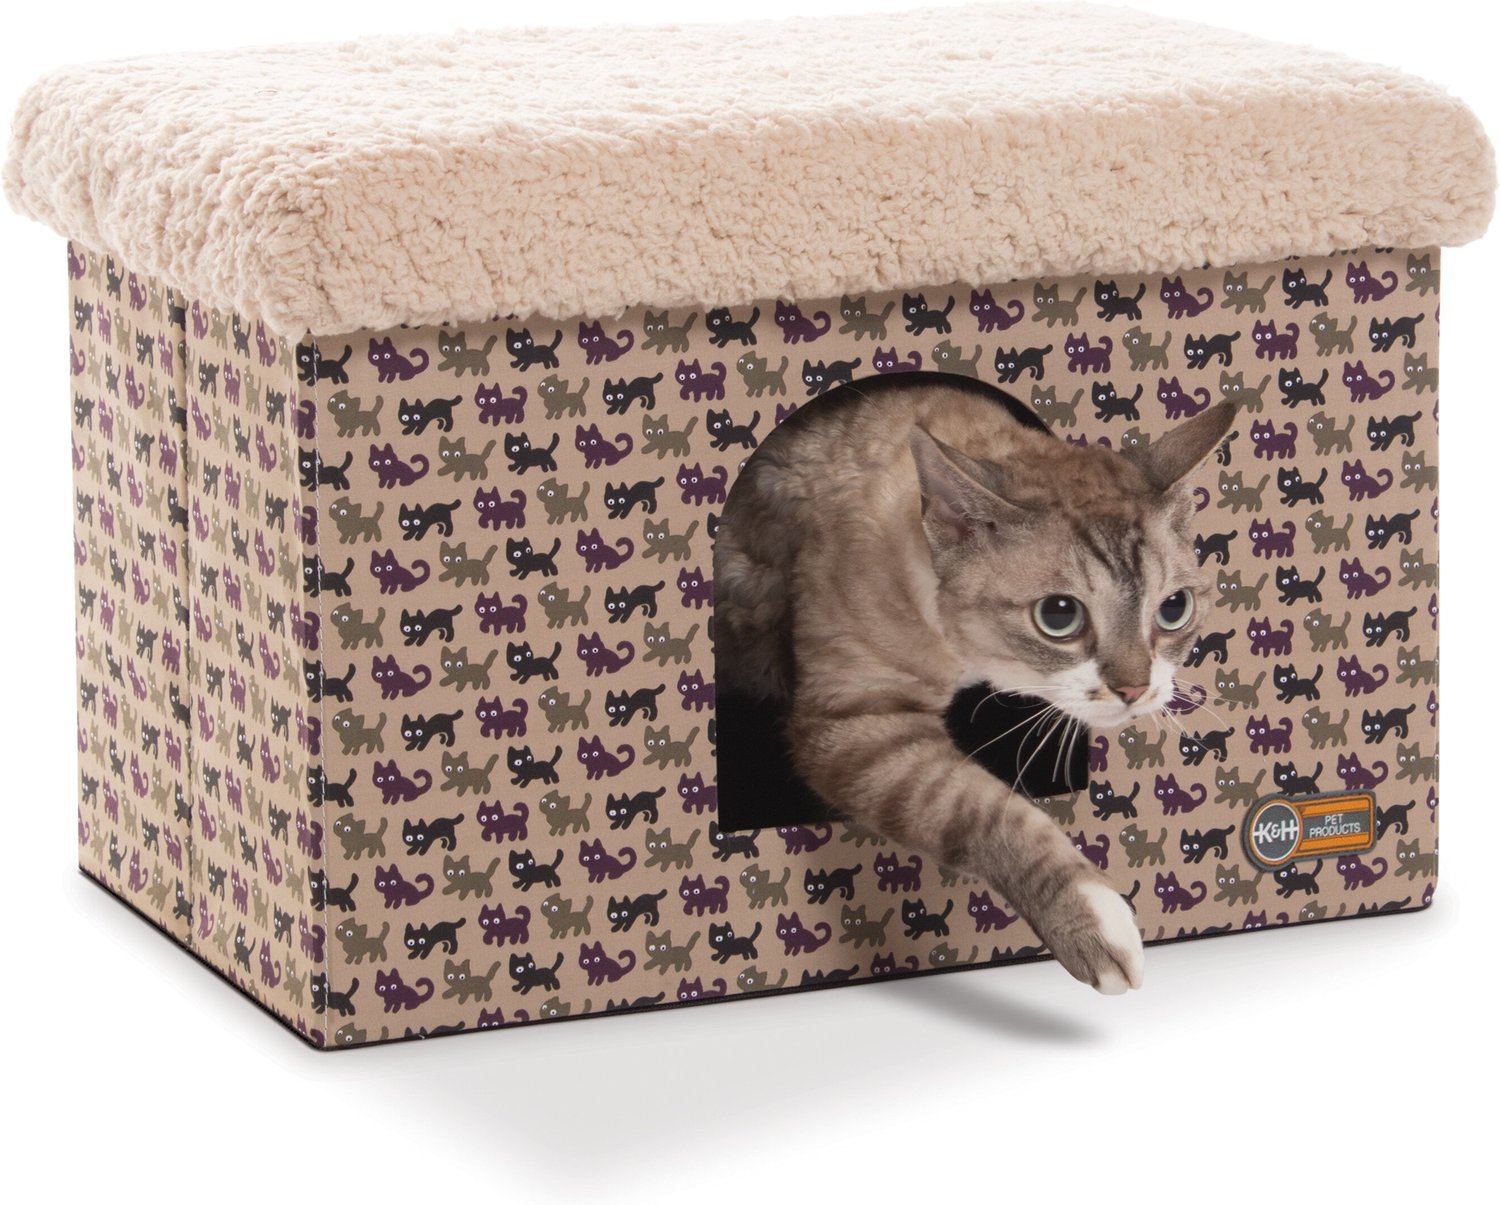 KH PET PRODUCTS Kitty Bunkhouse Covered Cat Bed